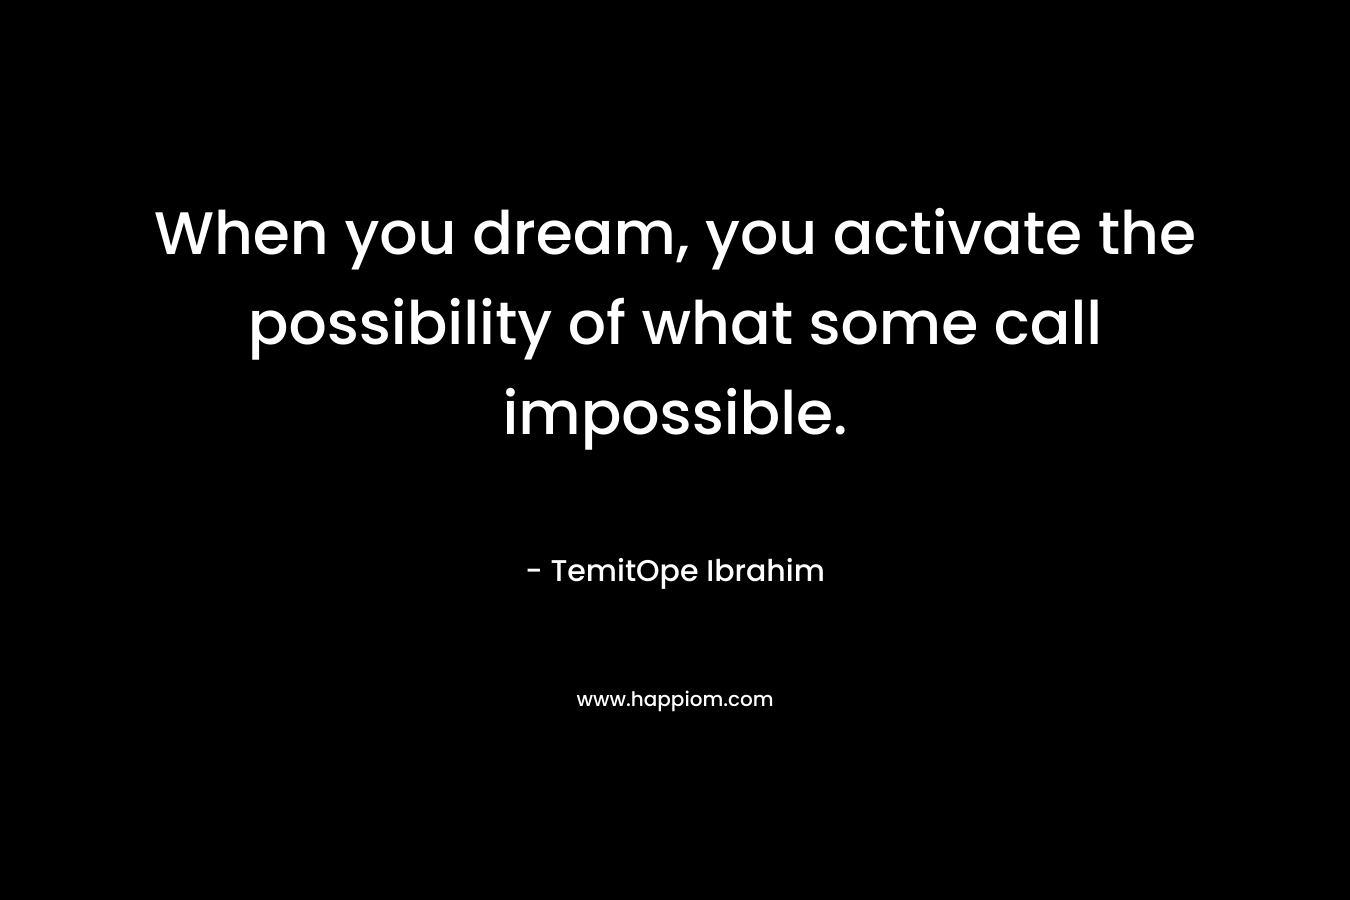 When you dream, you activate the possibility of what some call impossible.